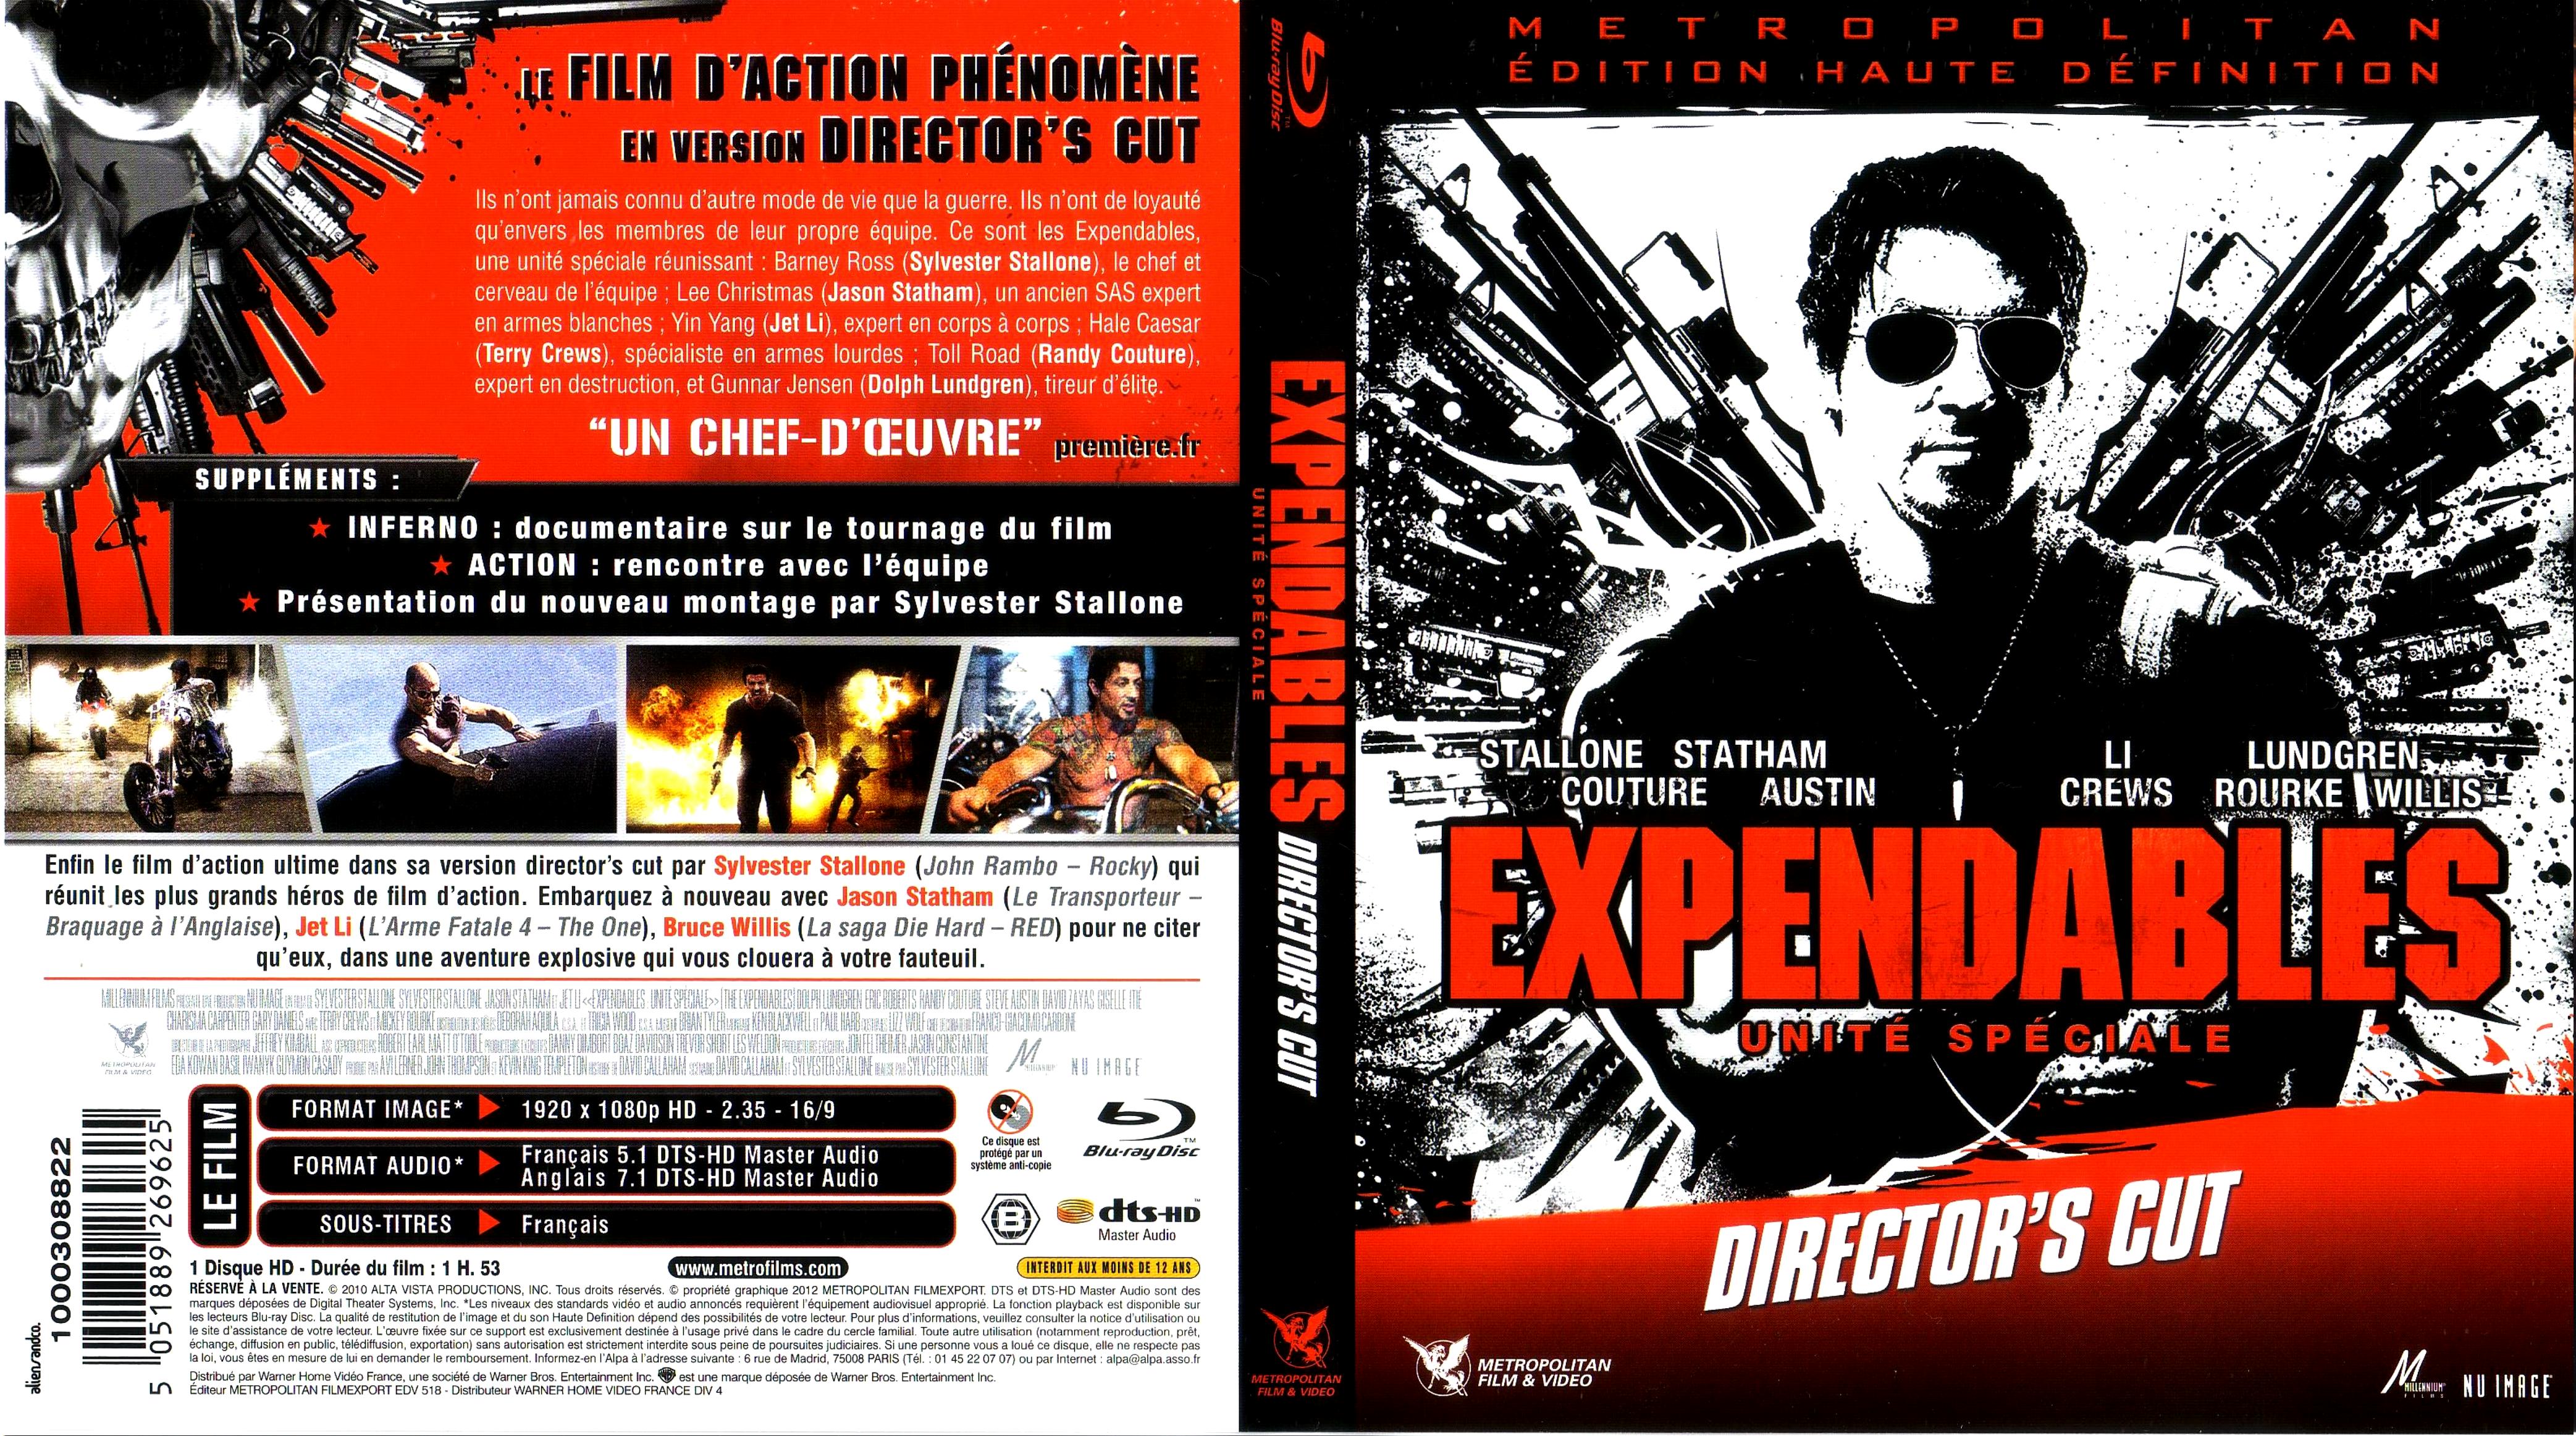 Jaquette DVD Expendables (BLU-RAY) v3